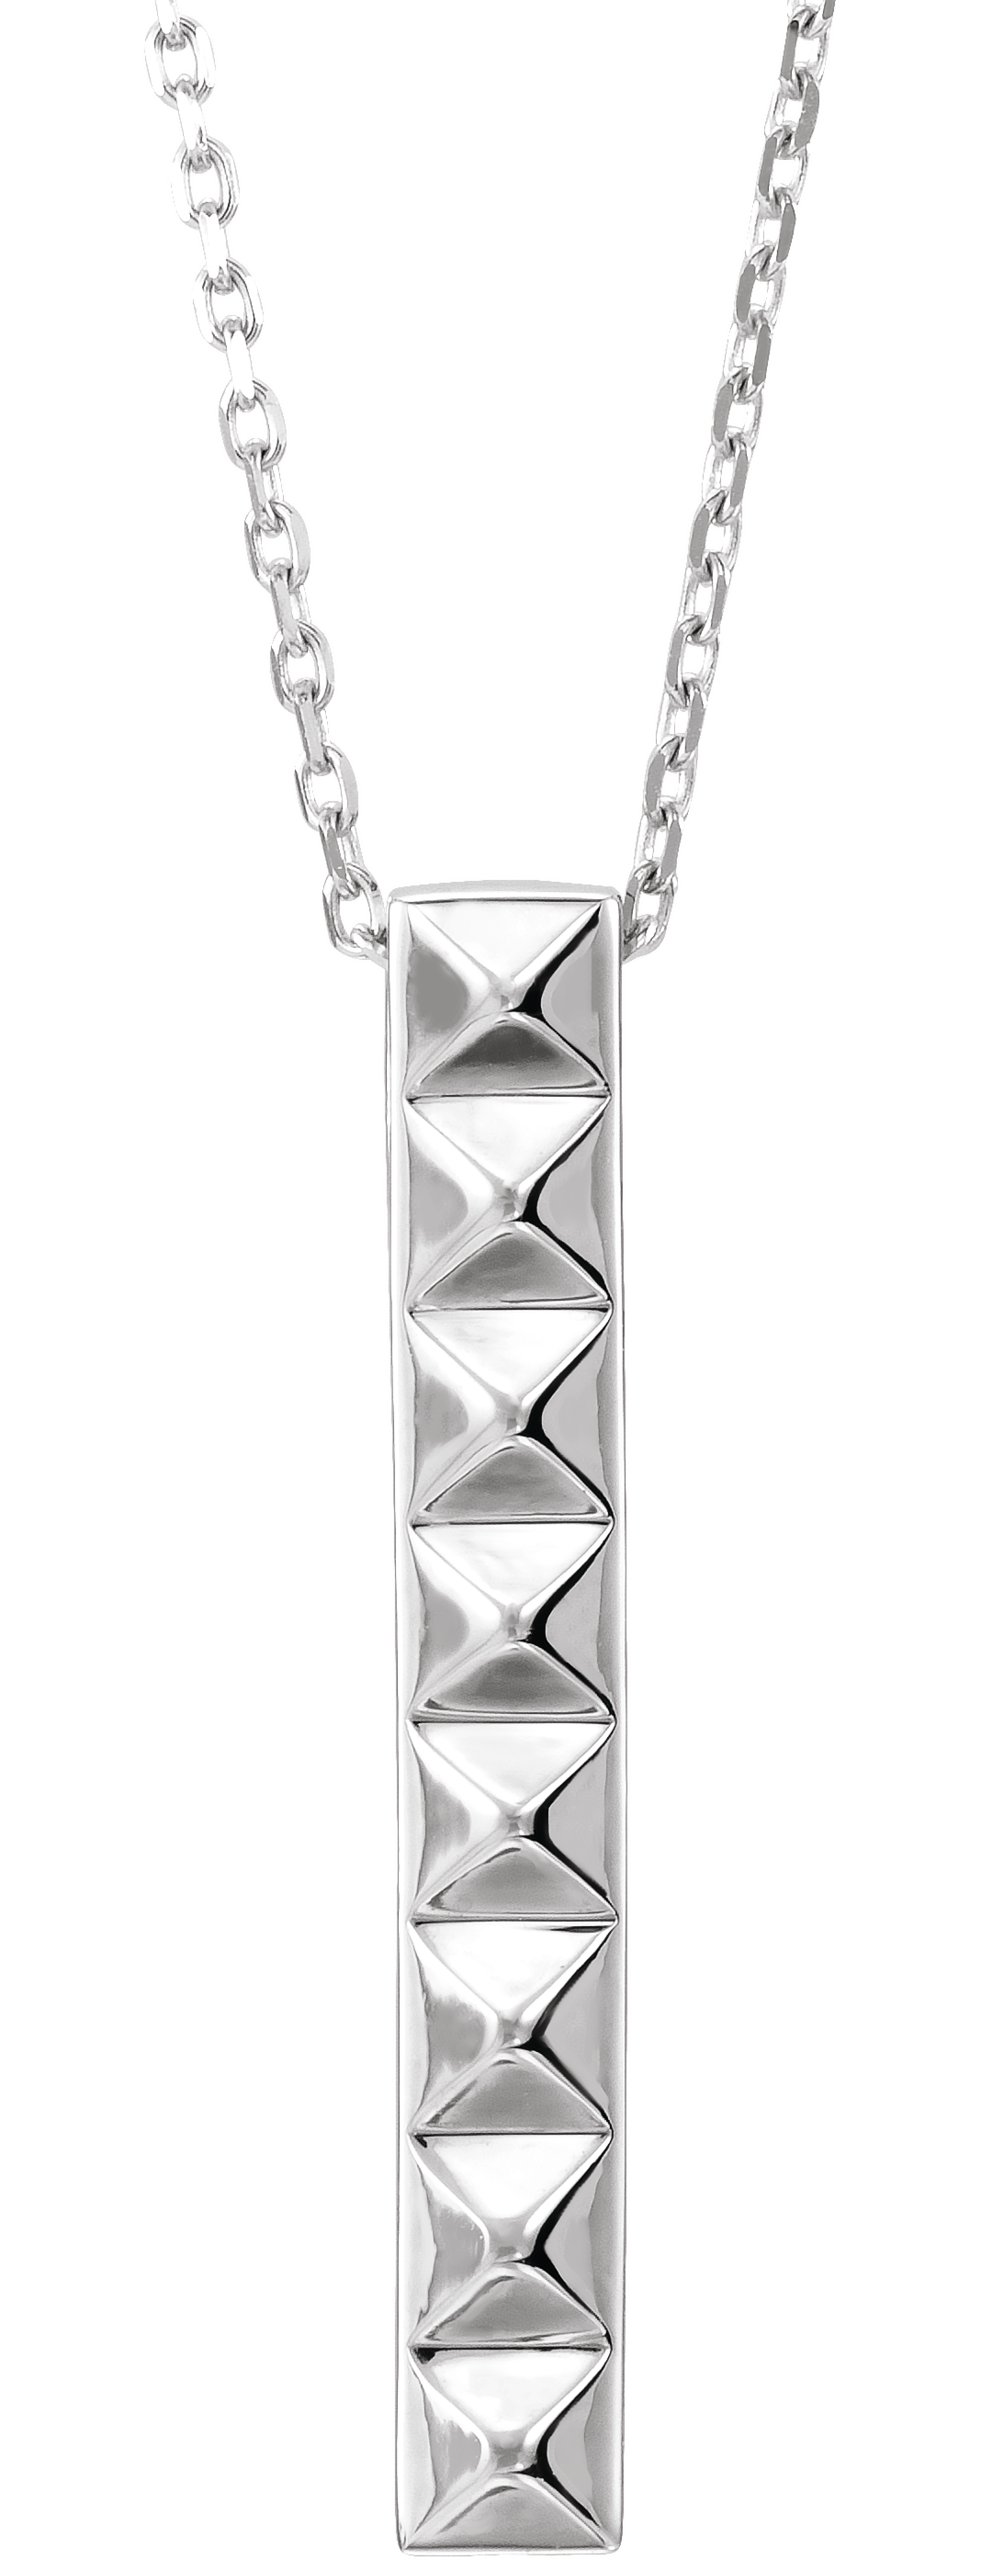 Sterling Silver Pyramid Bar 16-18" Necklace